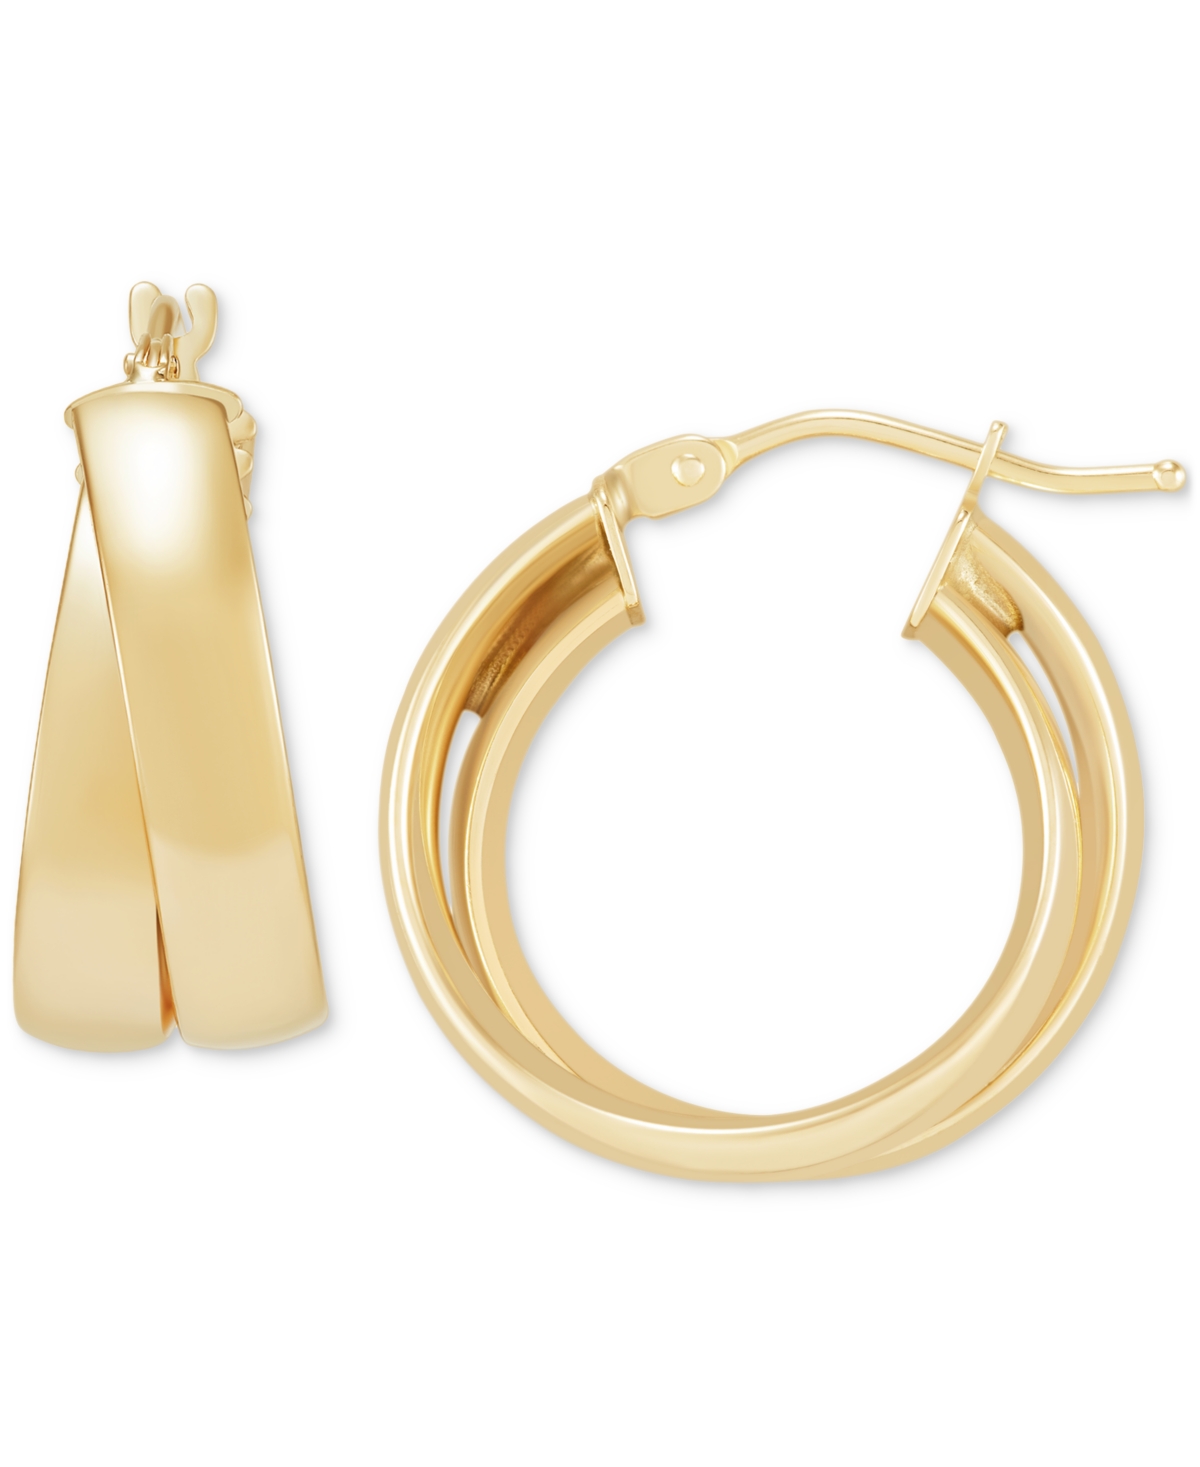 Italian Gold Polished Crossover Double Small Hoop Earrings In 14k Gold, 20mm In Yellow Gold